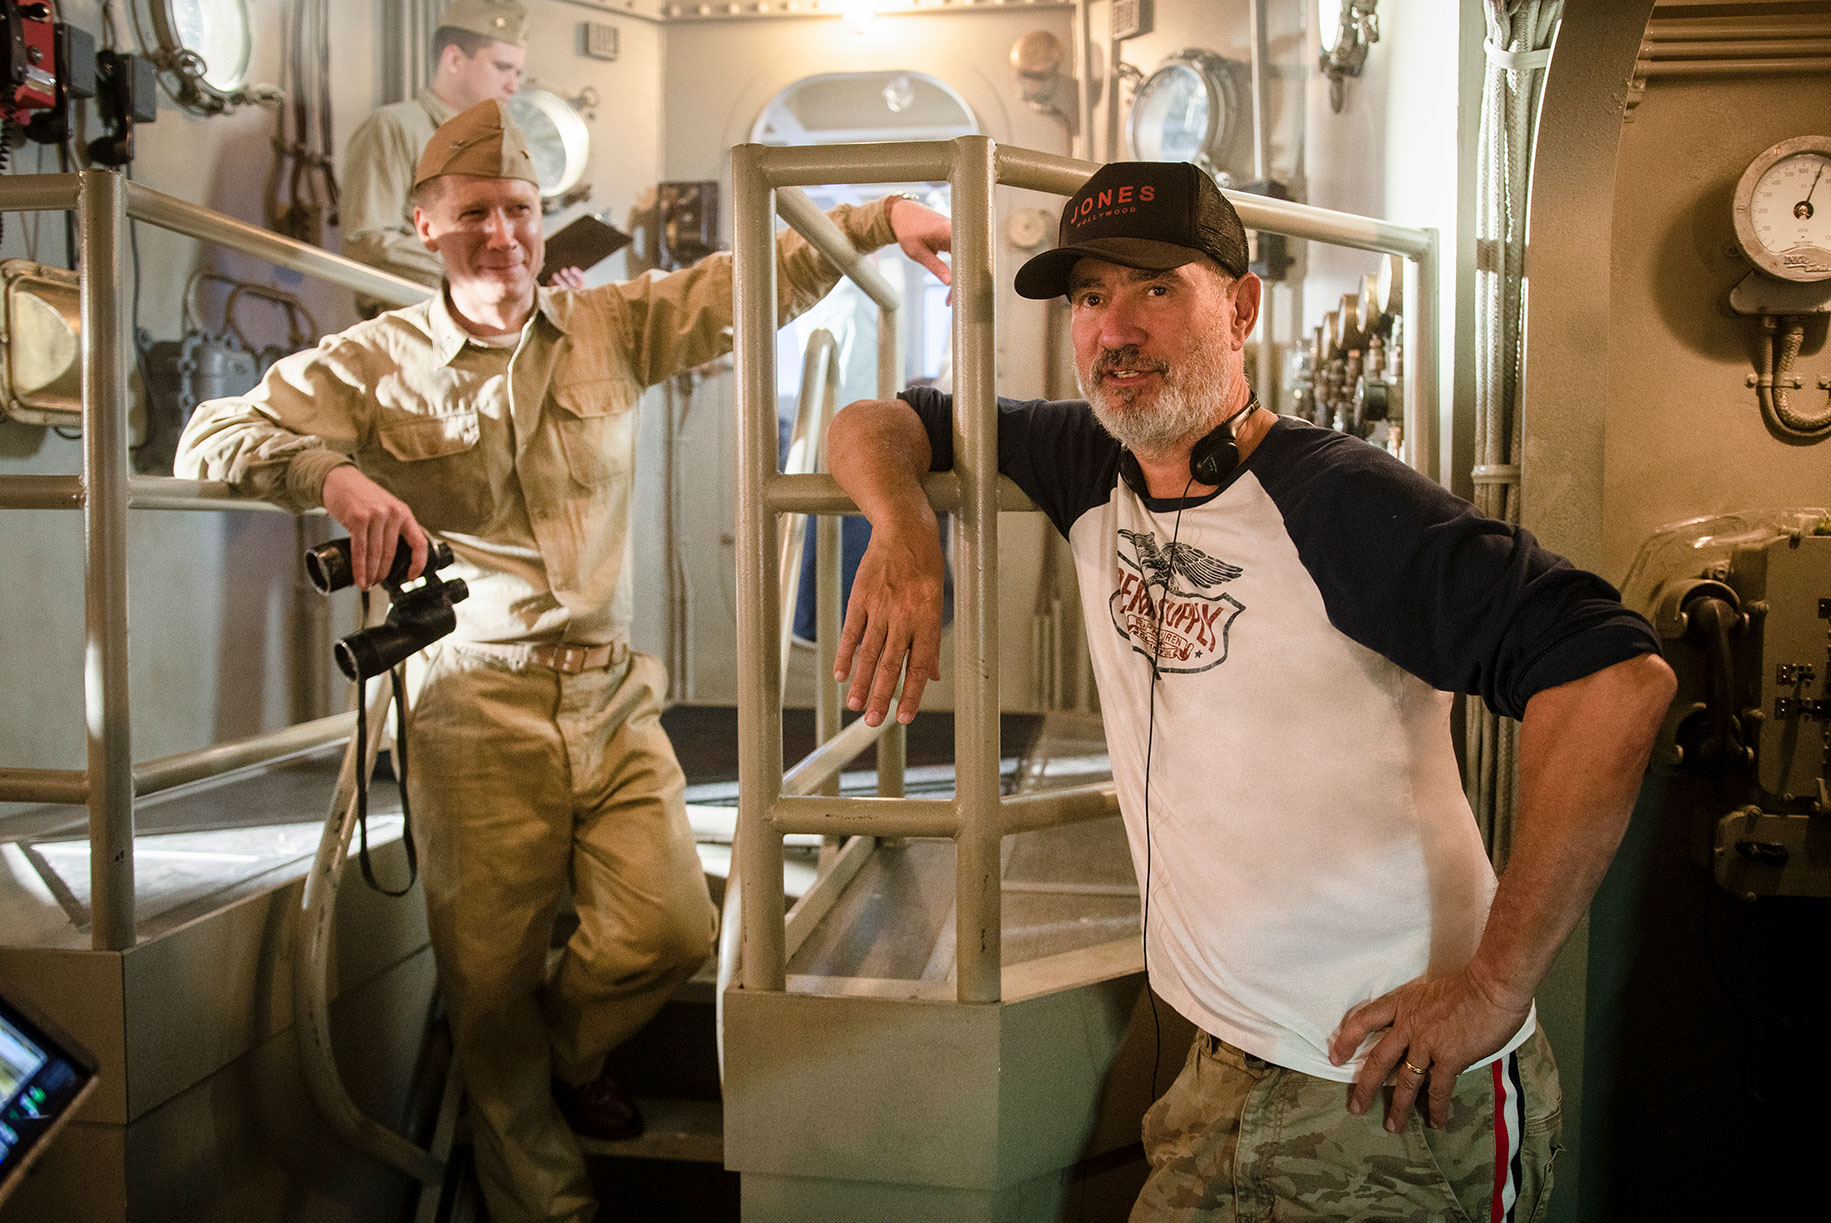 Director Roland Emmerich behind the scenes  on the set of MIDWAY. Photo credit: Reiner Bajo.